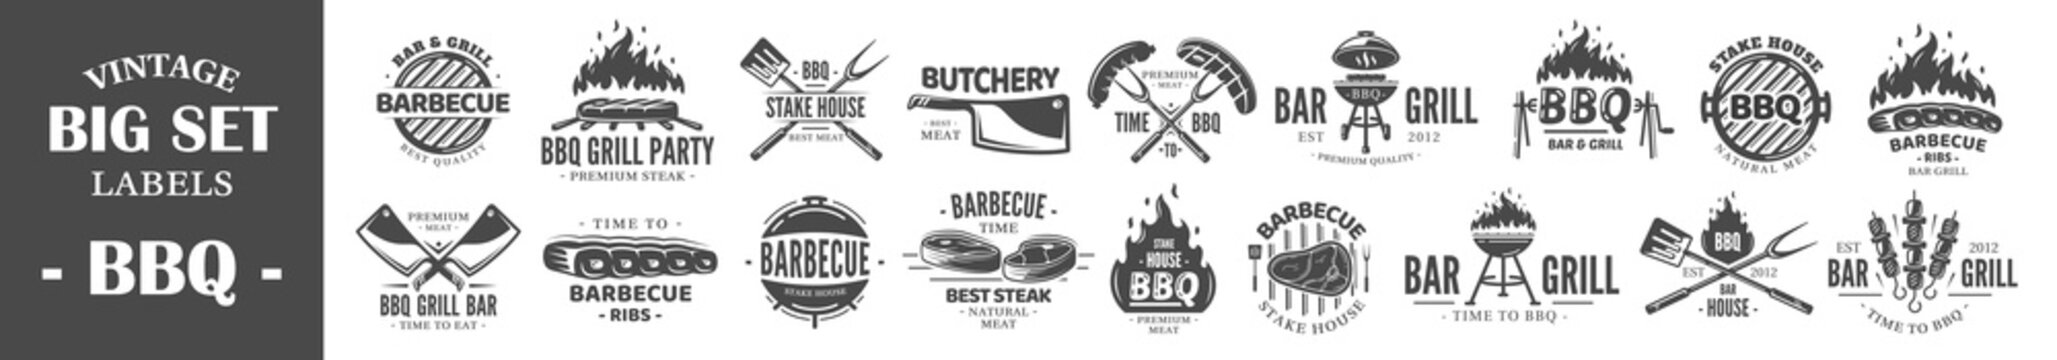 Big collections Vintage Barbecue Grill Labels isolated on white background. Set of BBQ Logo Templates for design. Vector illustrations